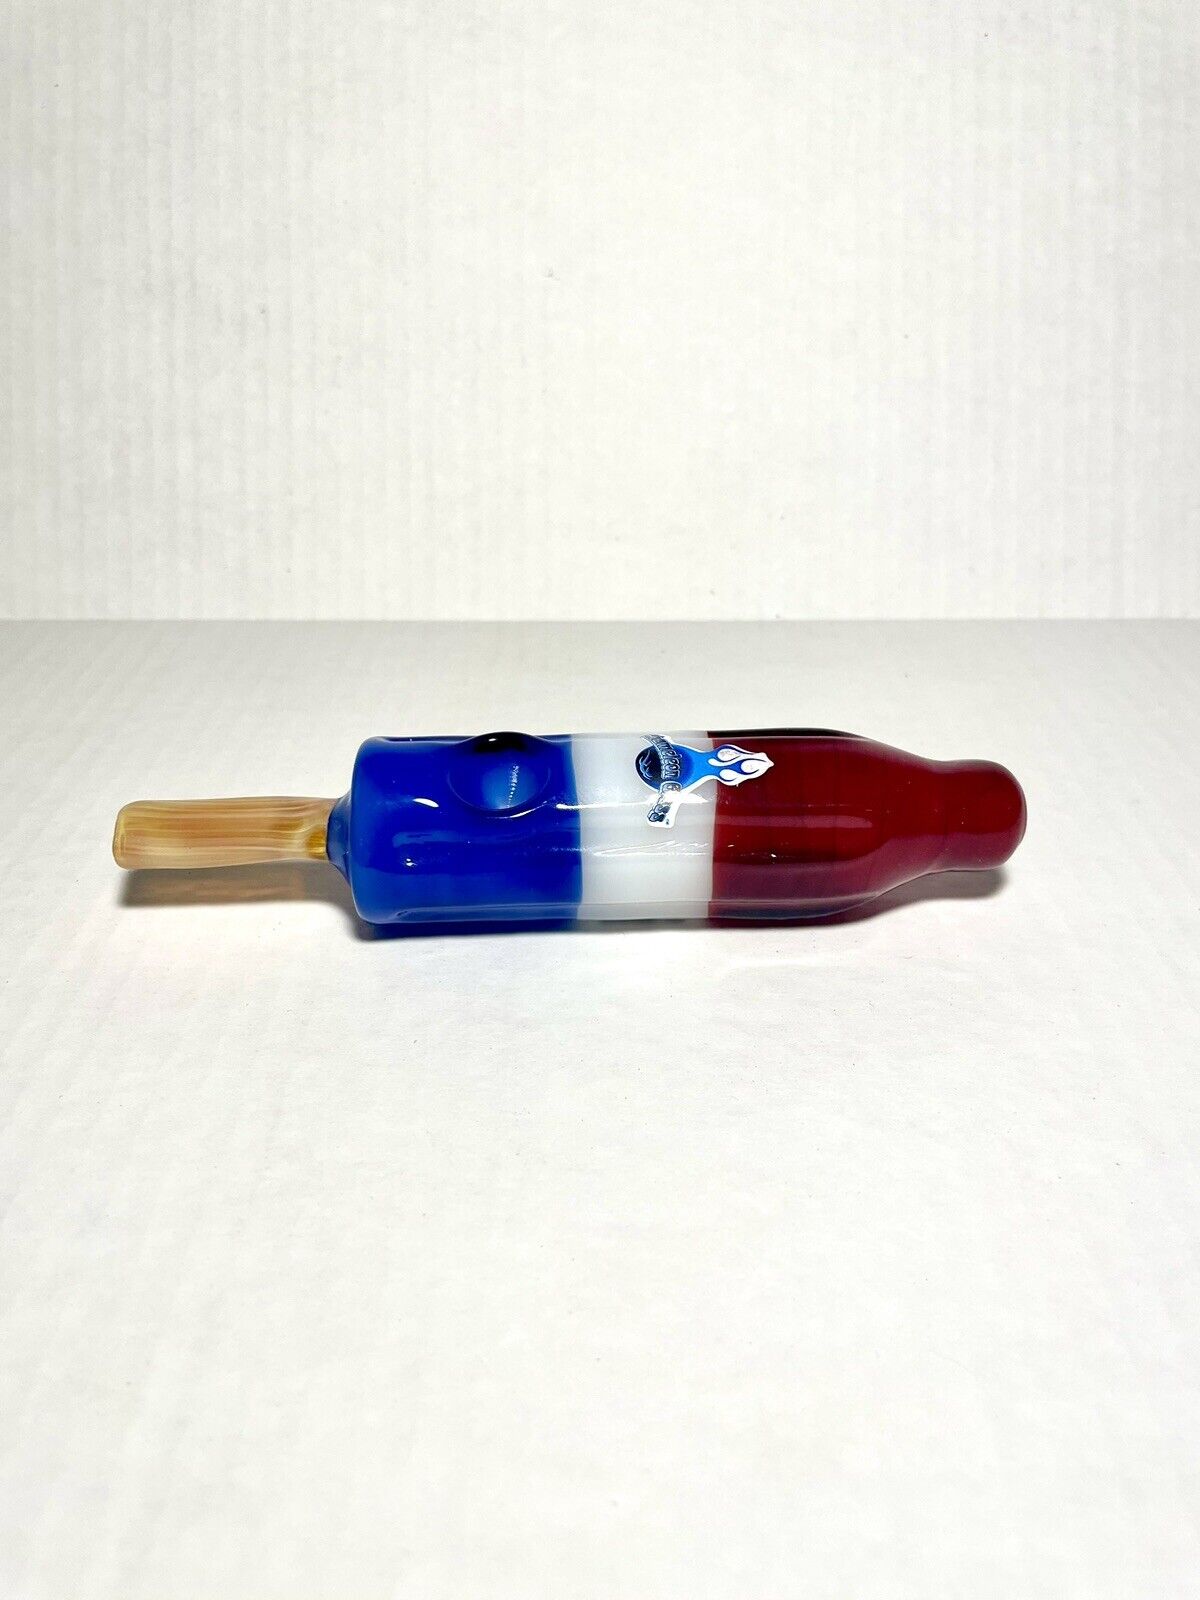 Chameleon Glass Bomb Pop Steamroller Tobacco Hand Pipe Spoon Red White Blue